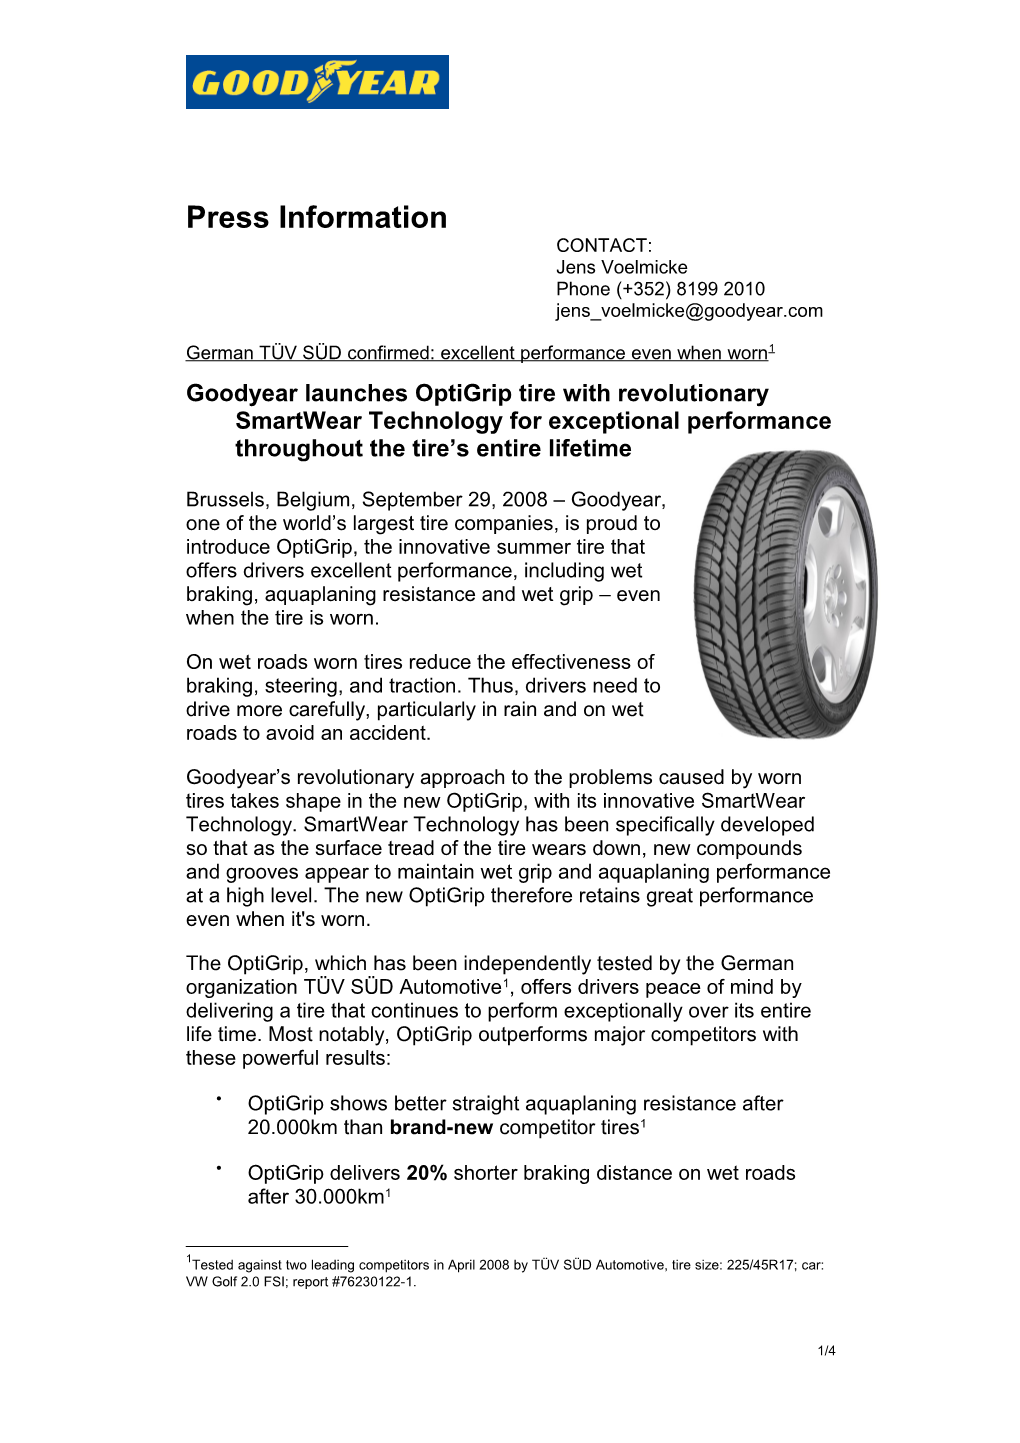 Goodyear Launches Optigrip Tire with Revolutionary Smartwear Technology For